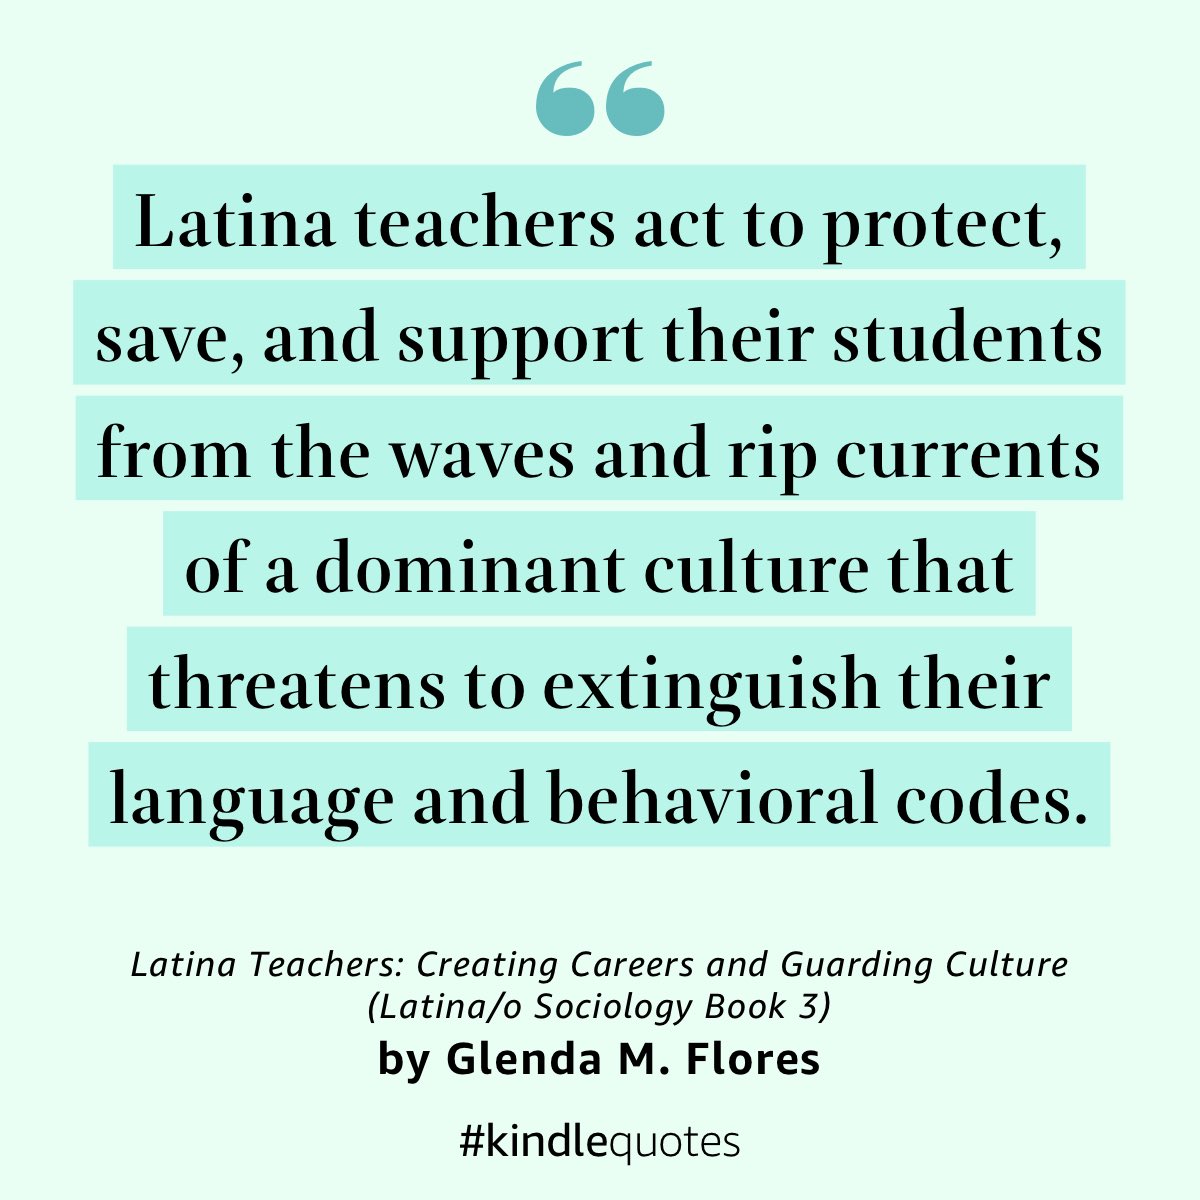 One of the most highlighted quotes #LatinaTeachers #CulturalGuardians #Ellchat_BkClub ⁦@GlendaMFlores⁩ ⁦⁦@emilyfranESL⁩